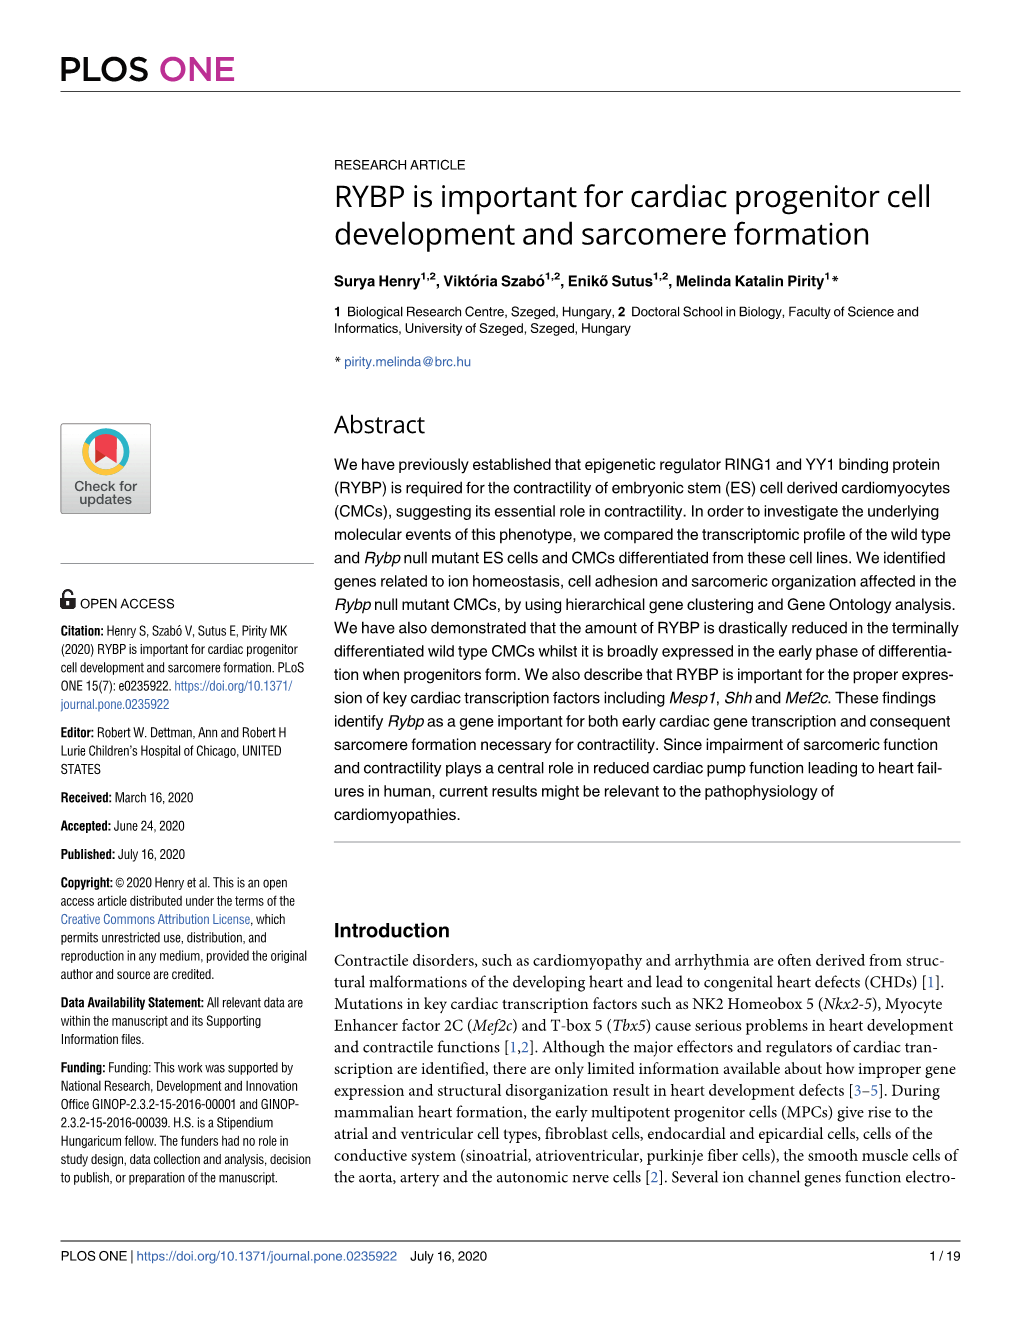 RYBP Is Important for Cardiac Progenitor Cell Development and Sarcomere Formation